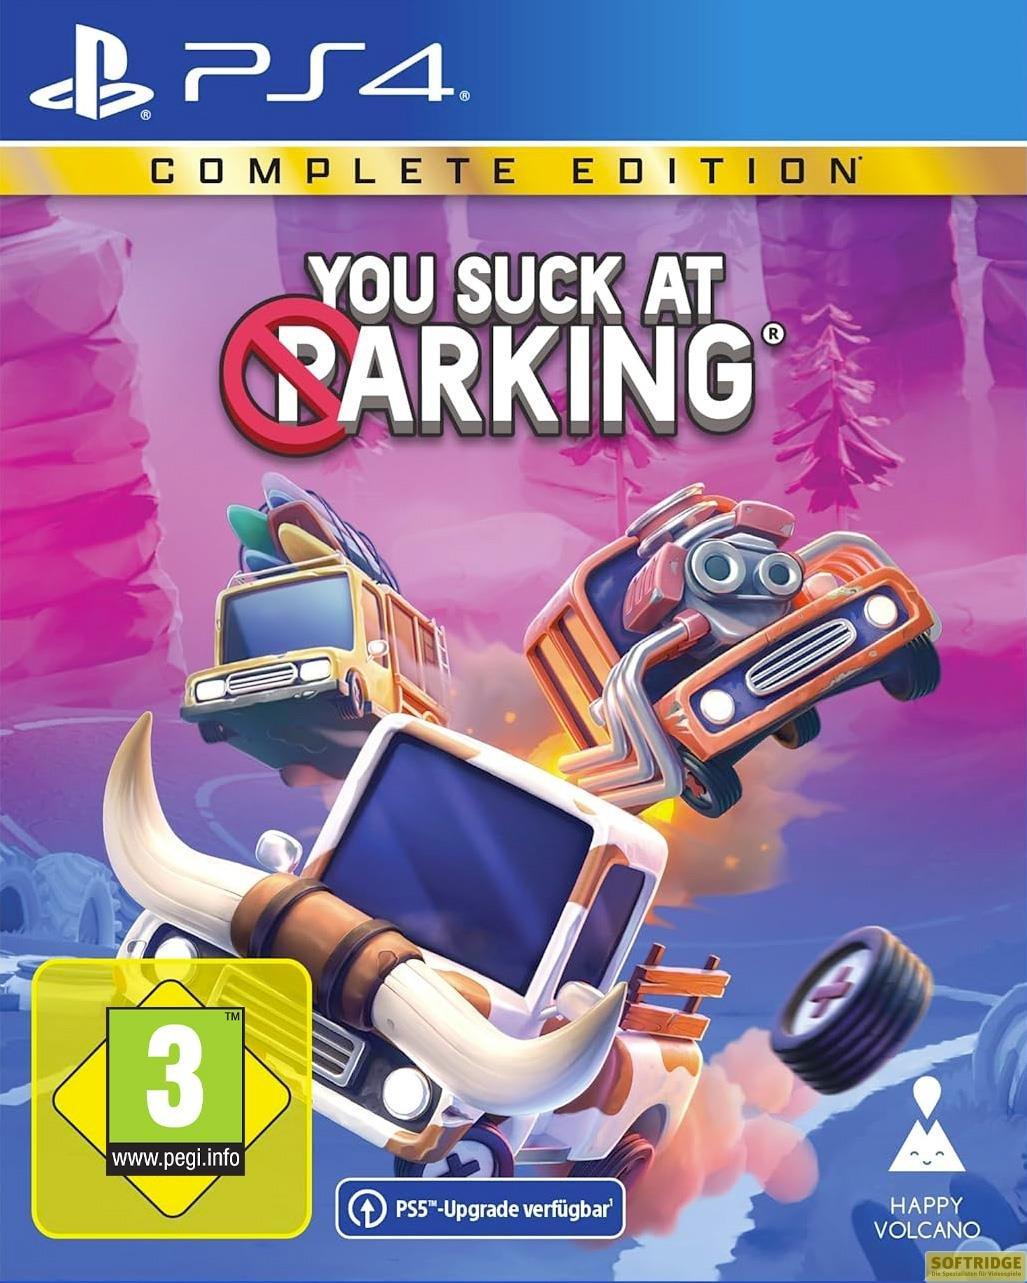 Nbg  You Suck at Parking - Complete Edition 